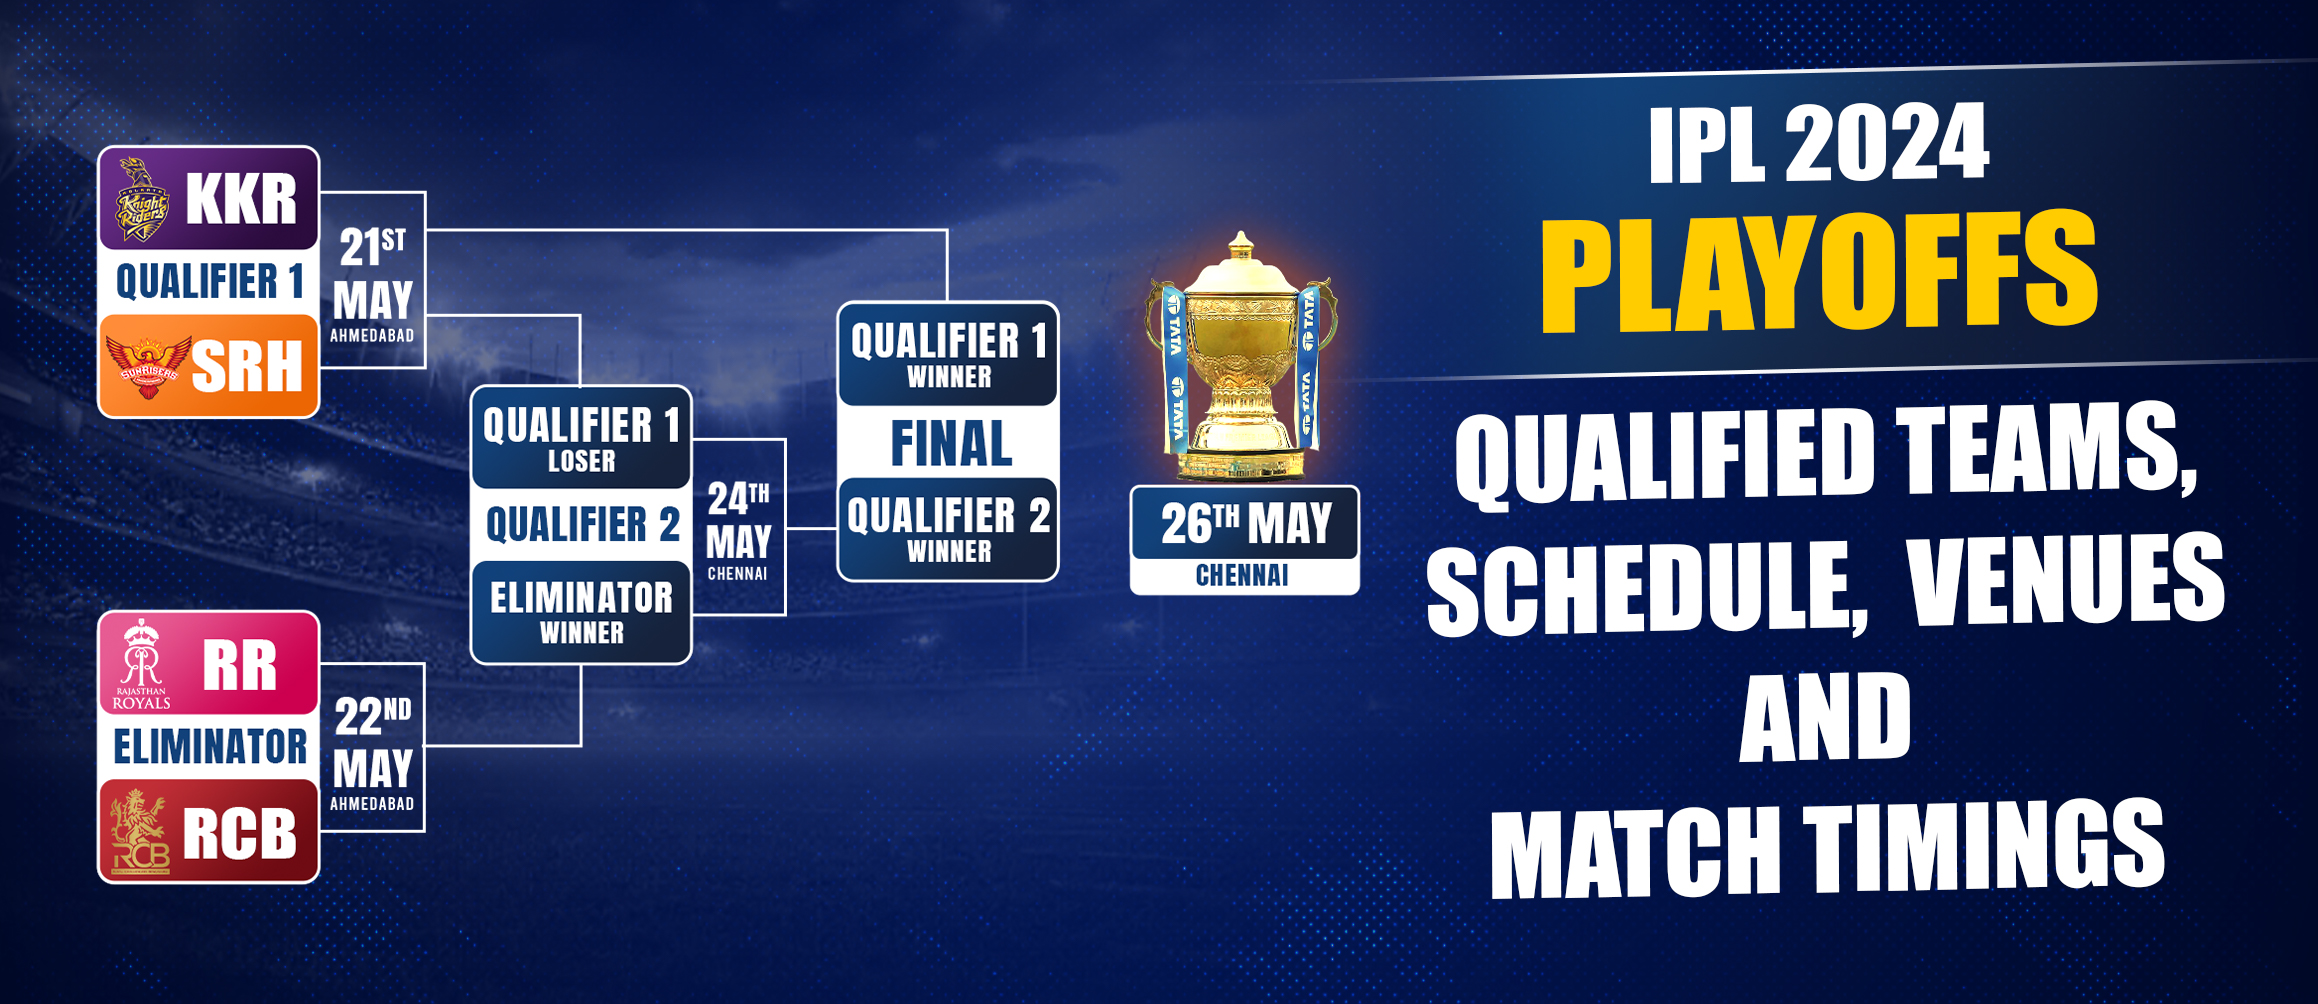 IPL 2024 Playoffs: Qualified Teams, Schedule, Venues and Match Timings